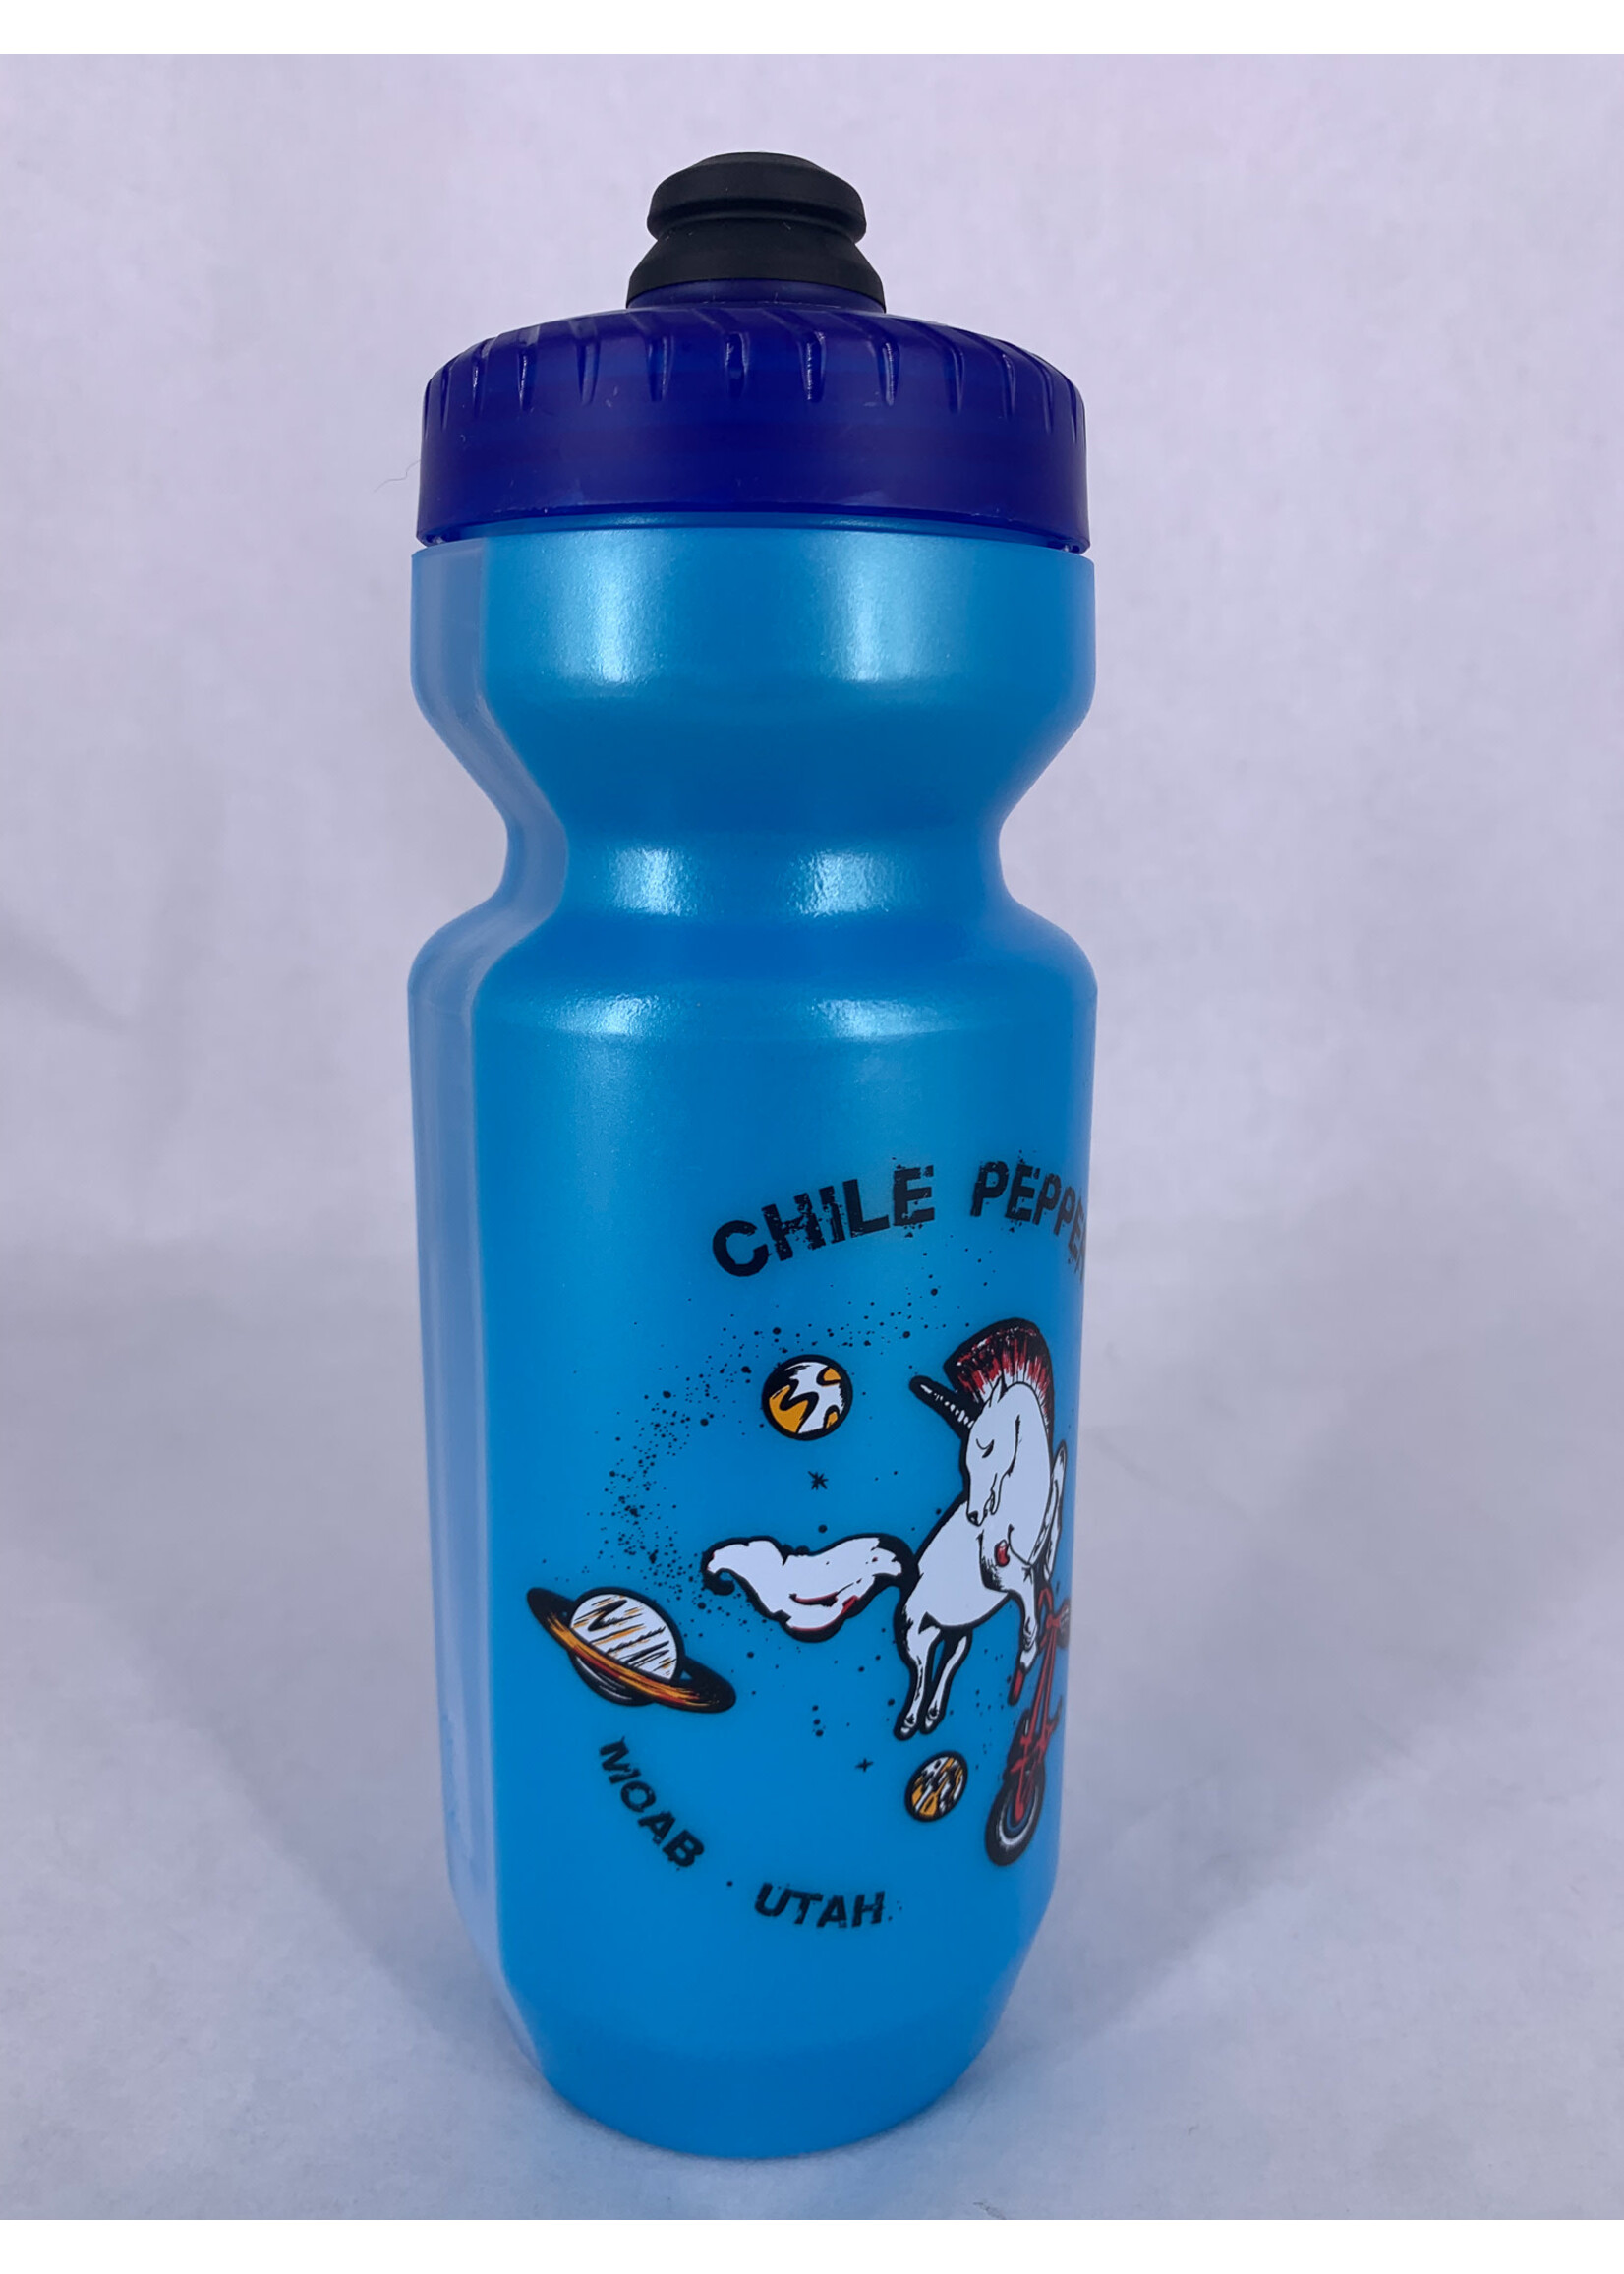 Chile Pepper Chile Unicorn Tailwhip 22oz. Water Bottle